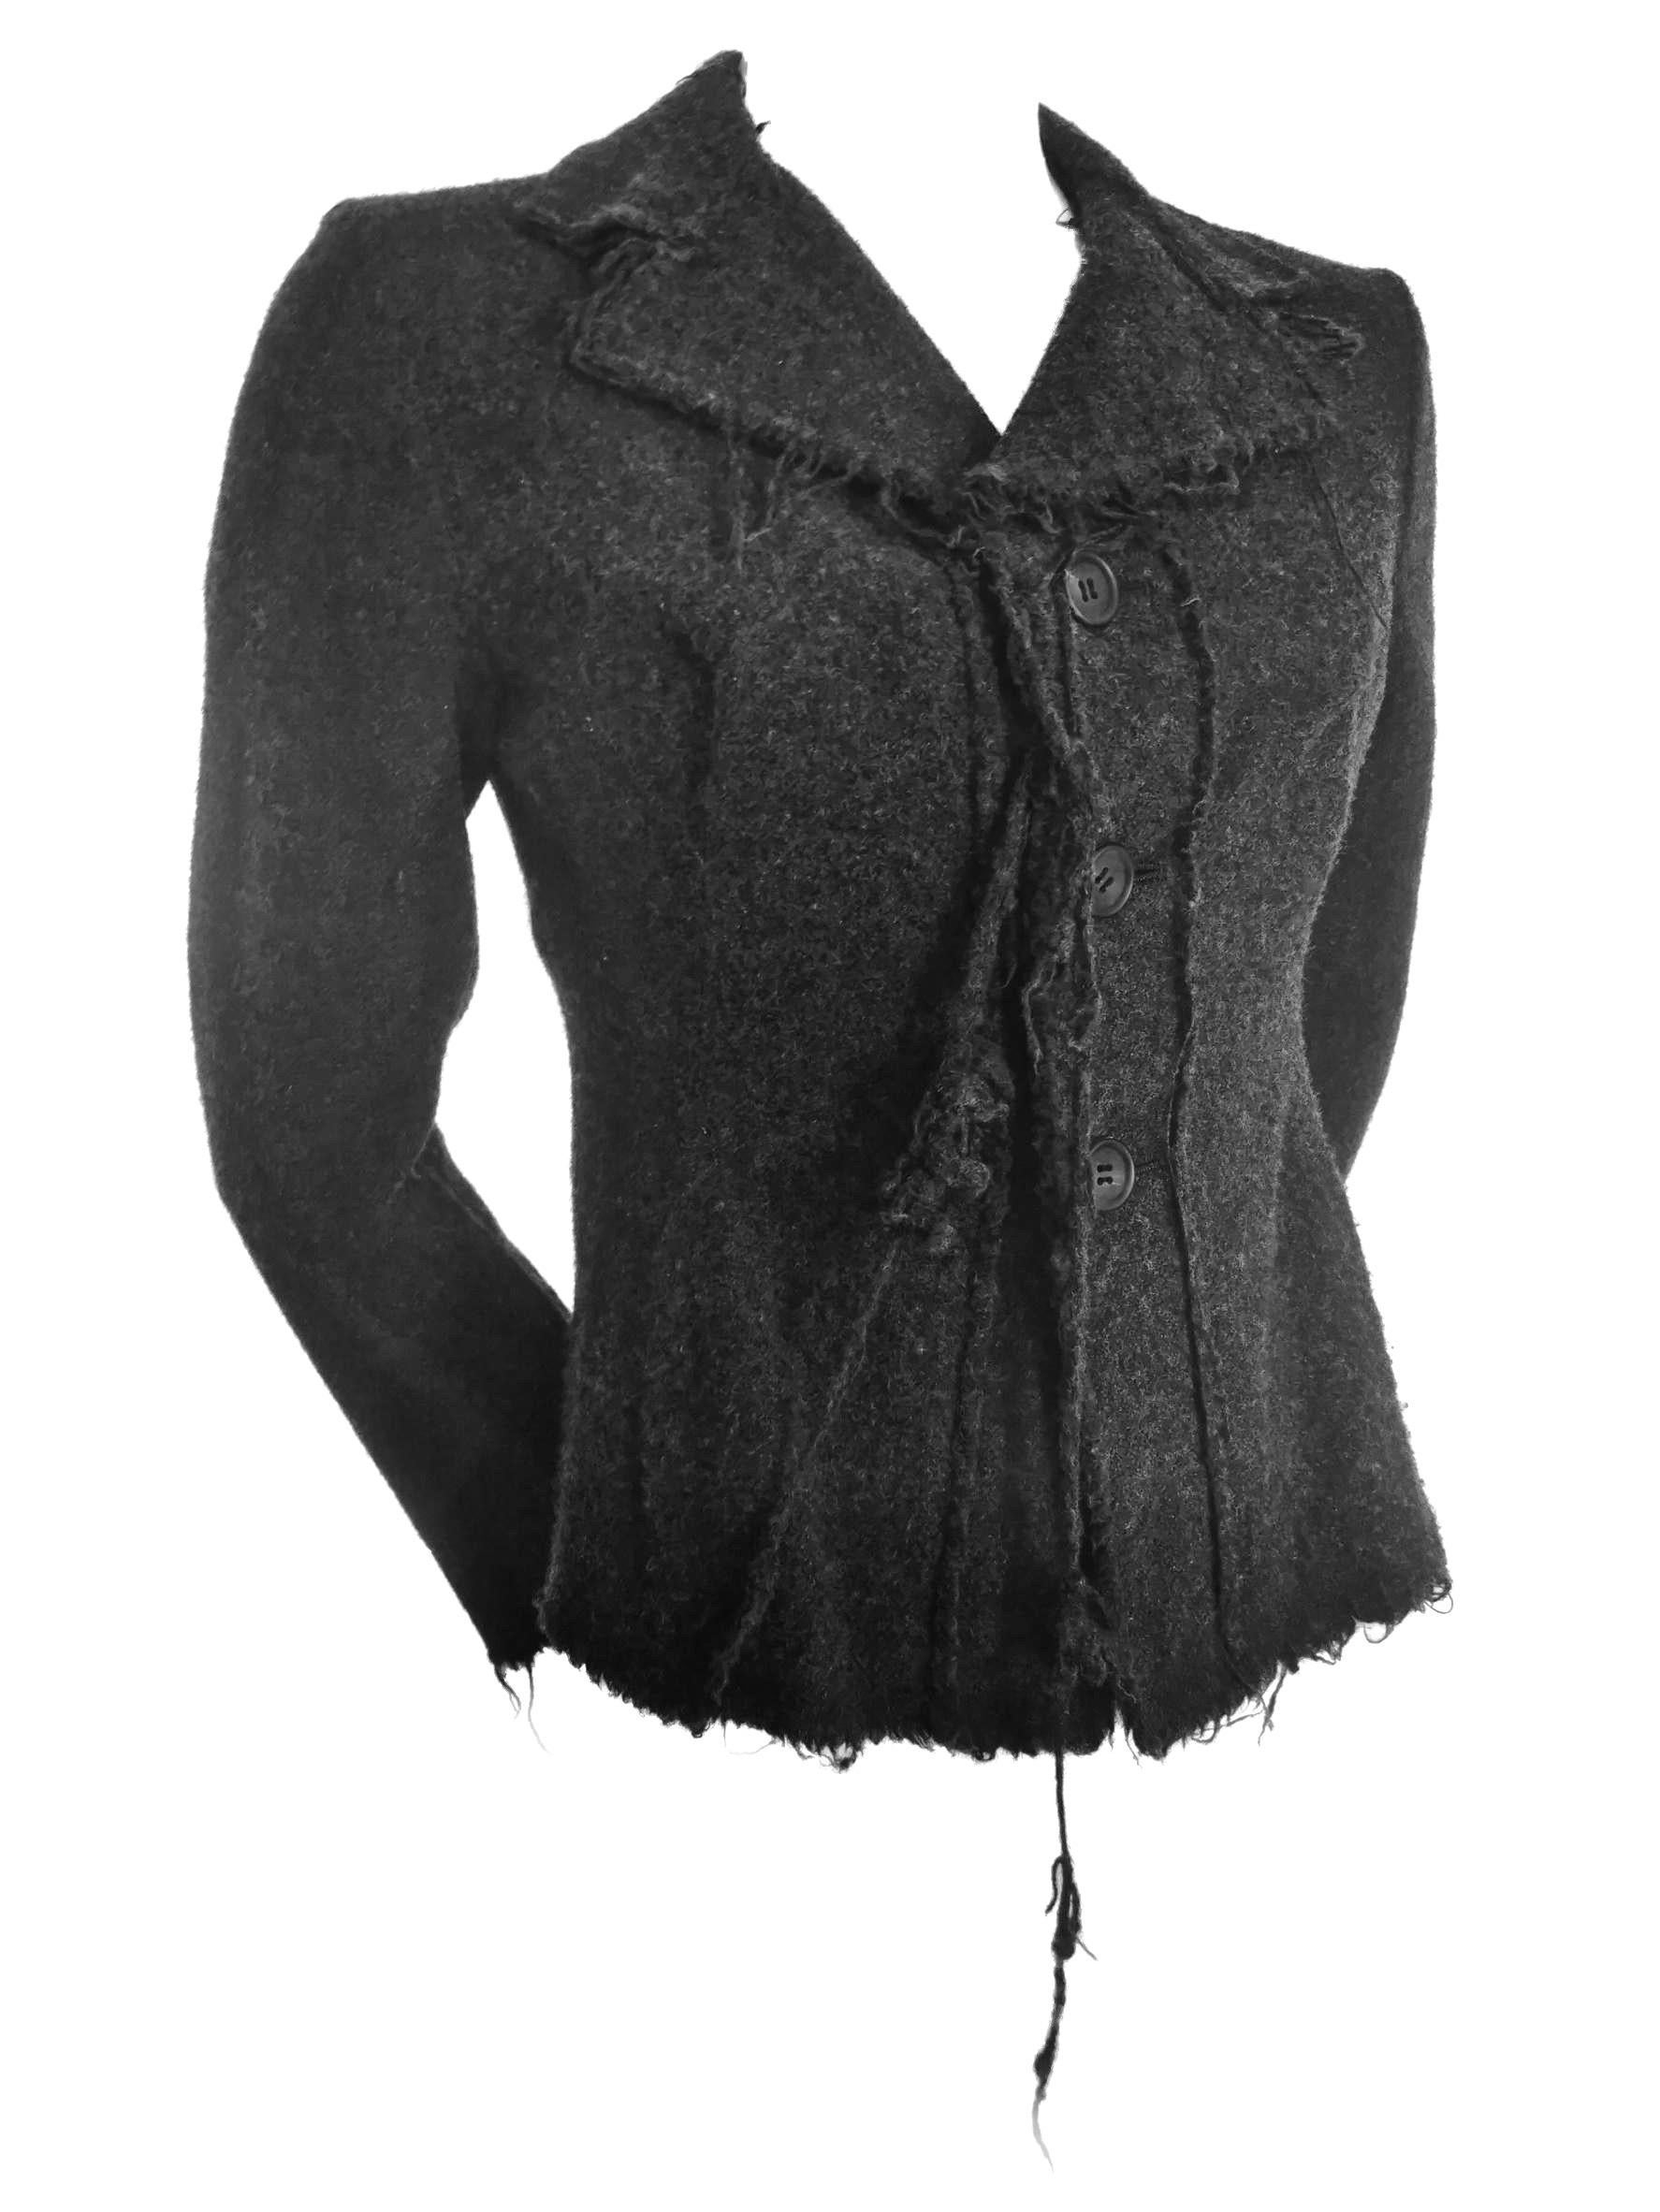 Women's Comme des Garcons Junya Watanabe Wool Frayed Edge Jacket AD2003 For Sale